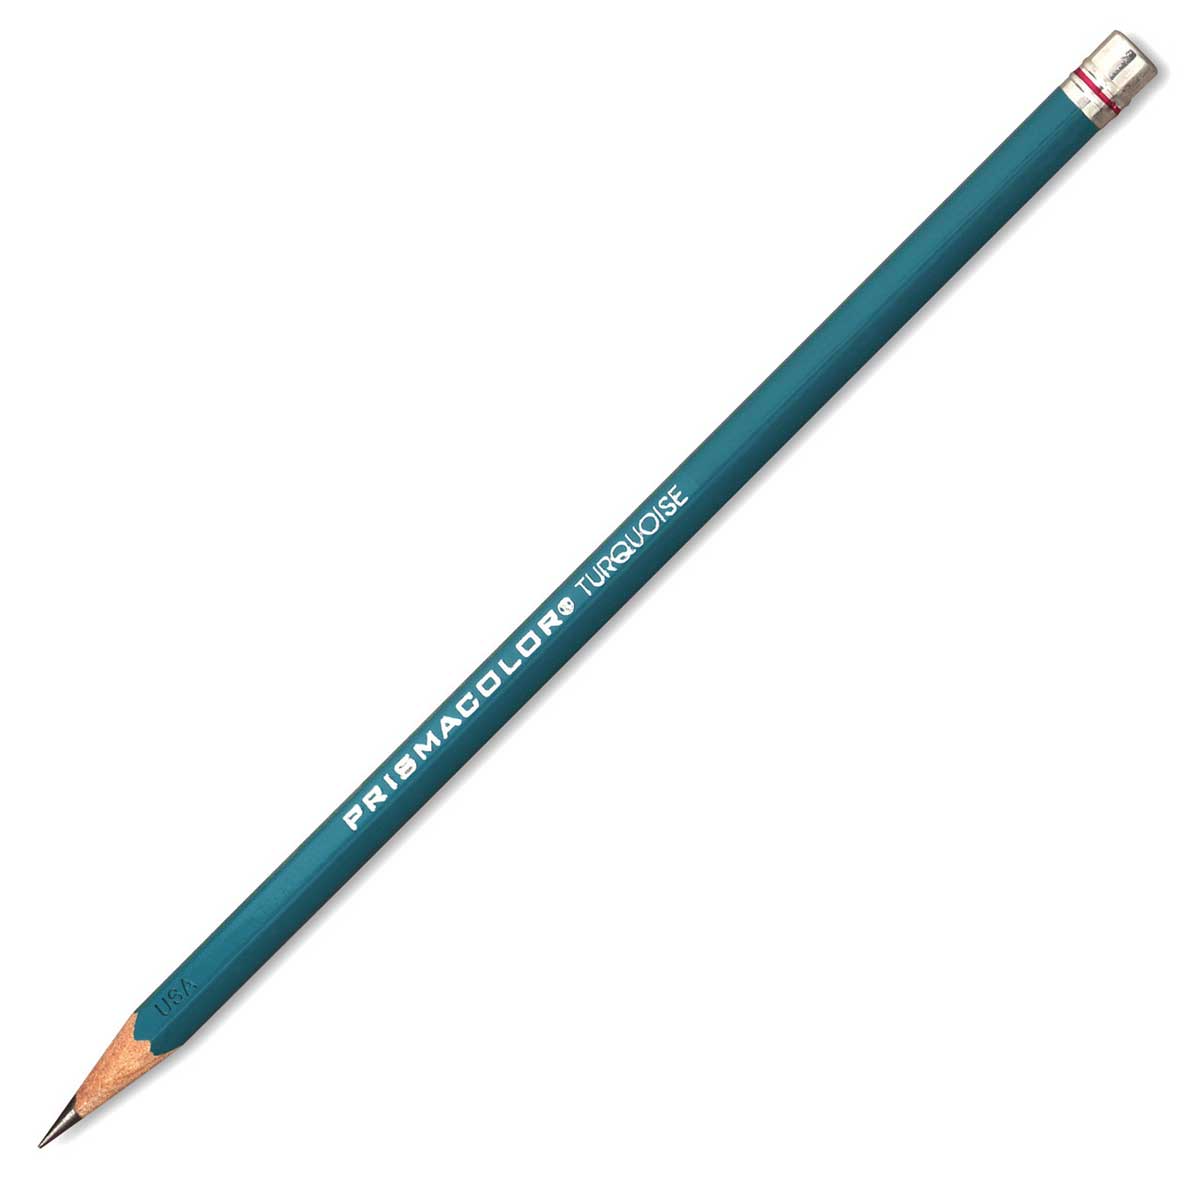 Prismacolor Turquoise Drawing Pencil - B